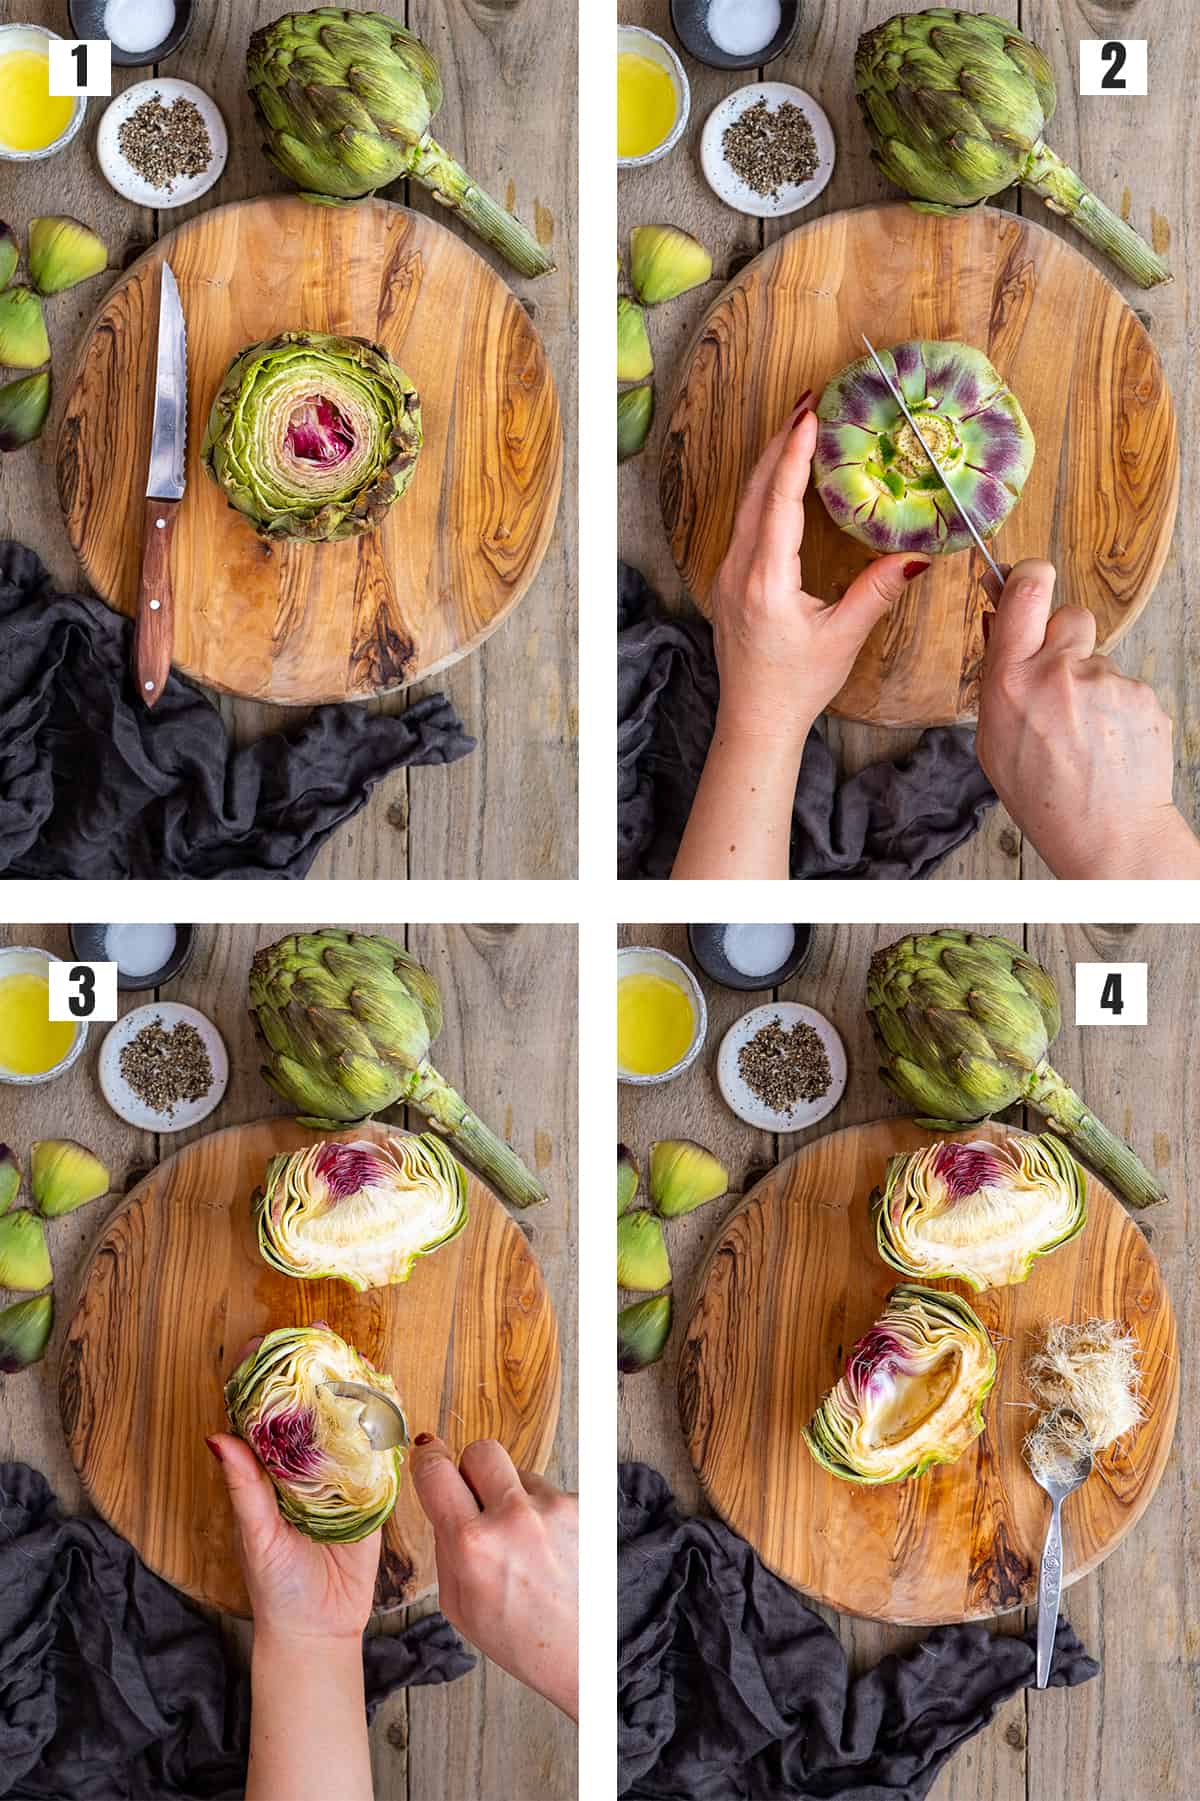 A collage of four pictures showing how to cut an artichoke and how to remove the choke inside it.